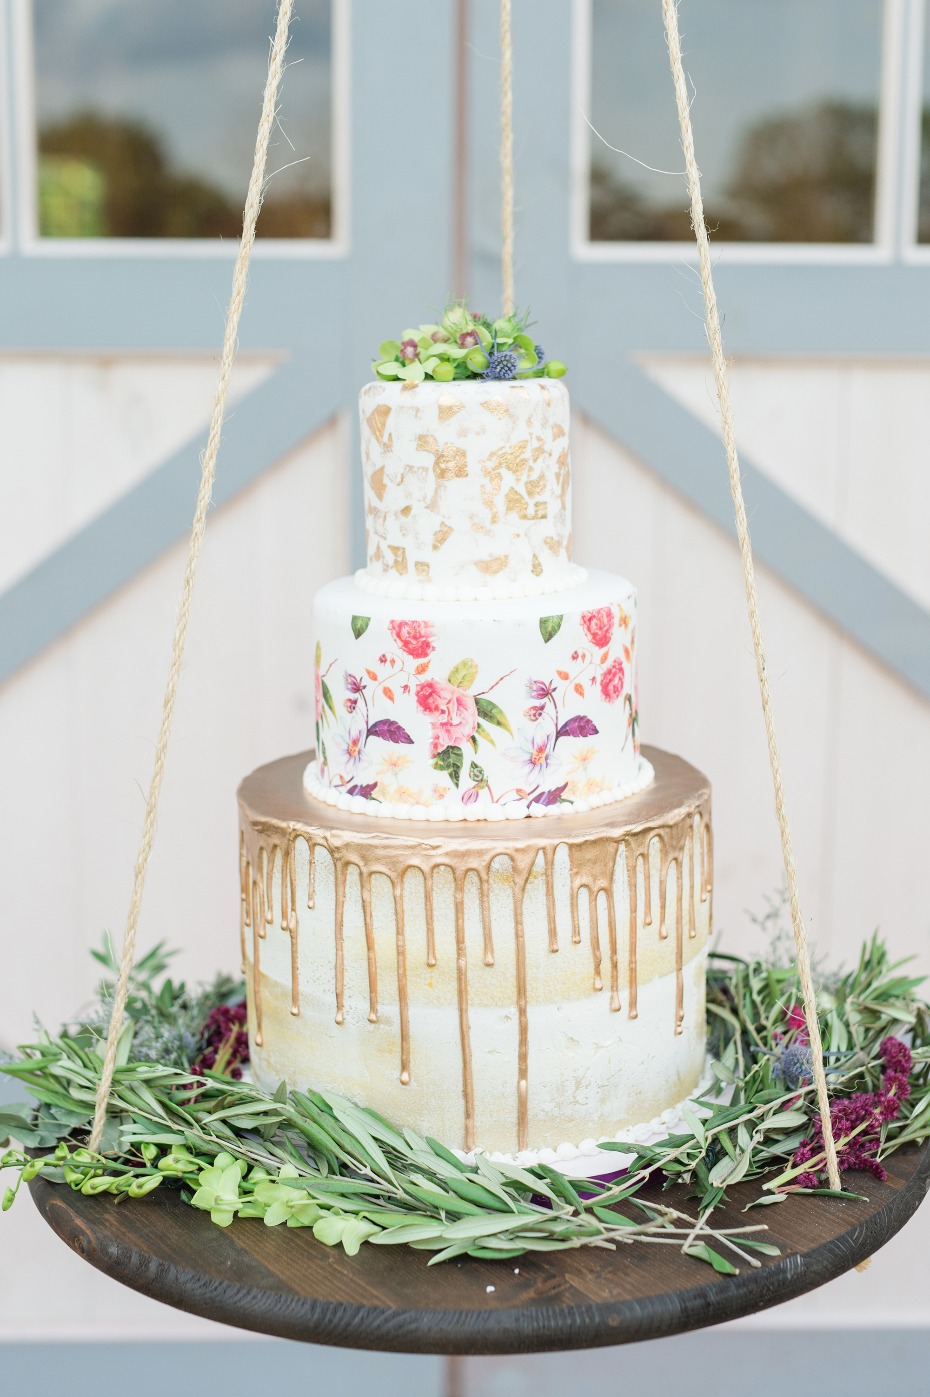 Gorgeous cake on a hanging cake stand